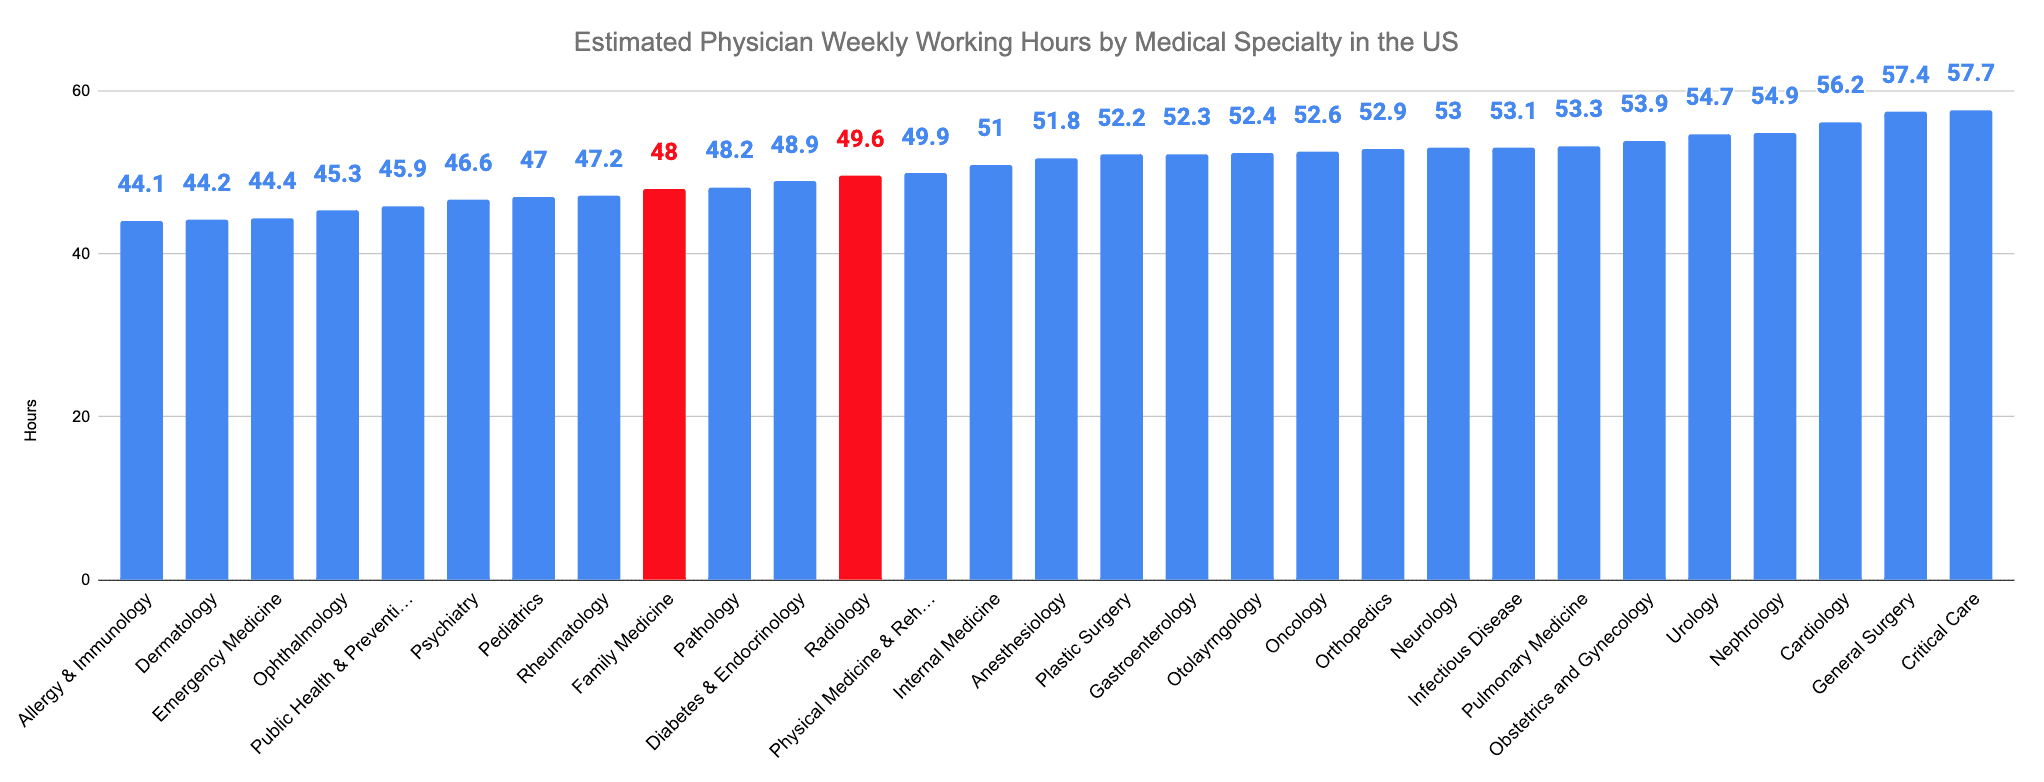 Radiology vs. Family Medicine Estimated Physician Weekly Working Hours by Medical Specialty in the US